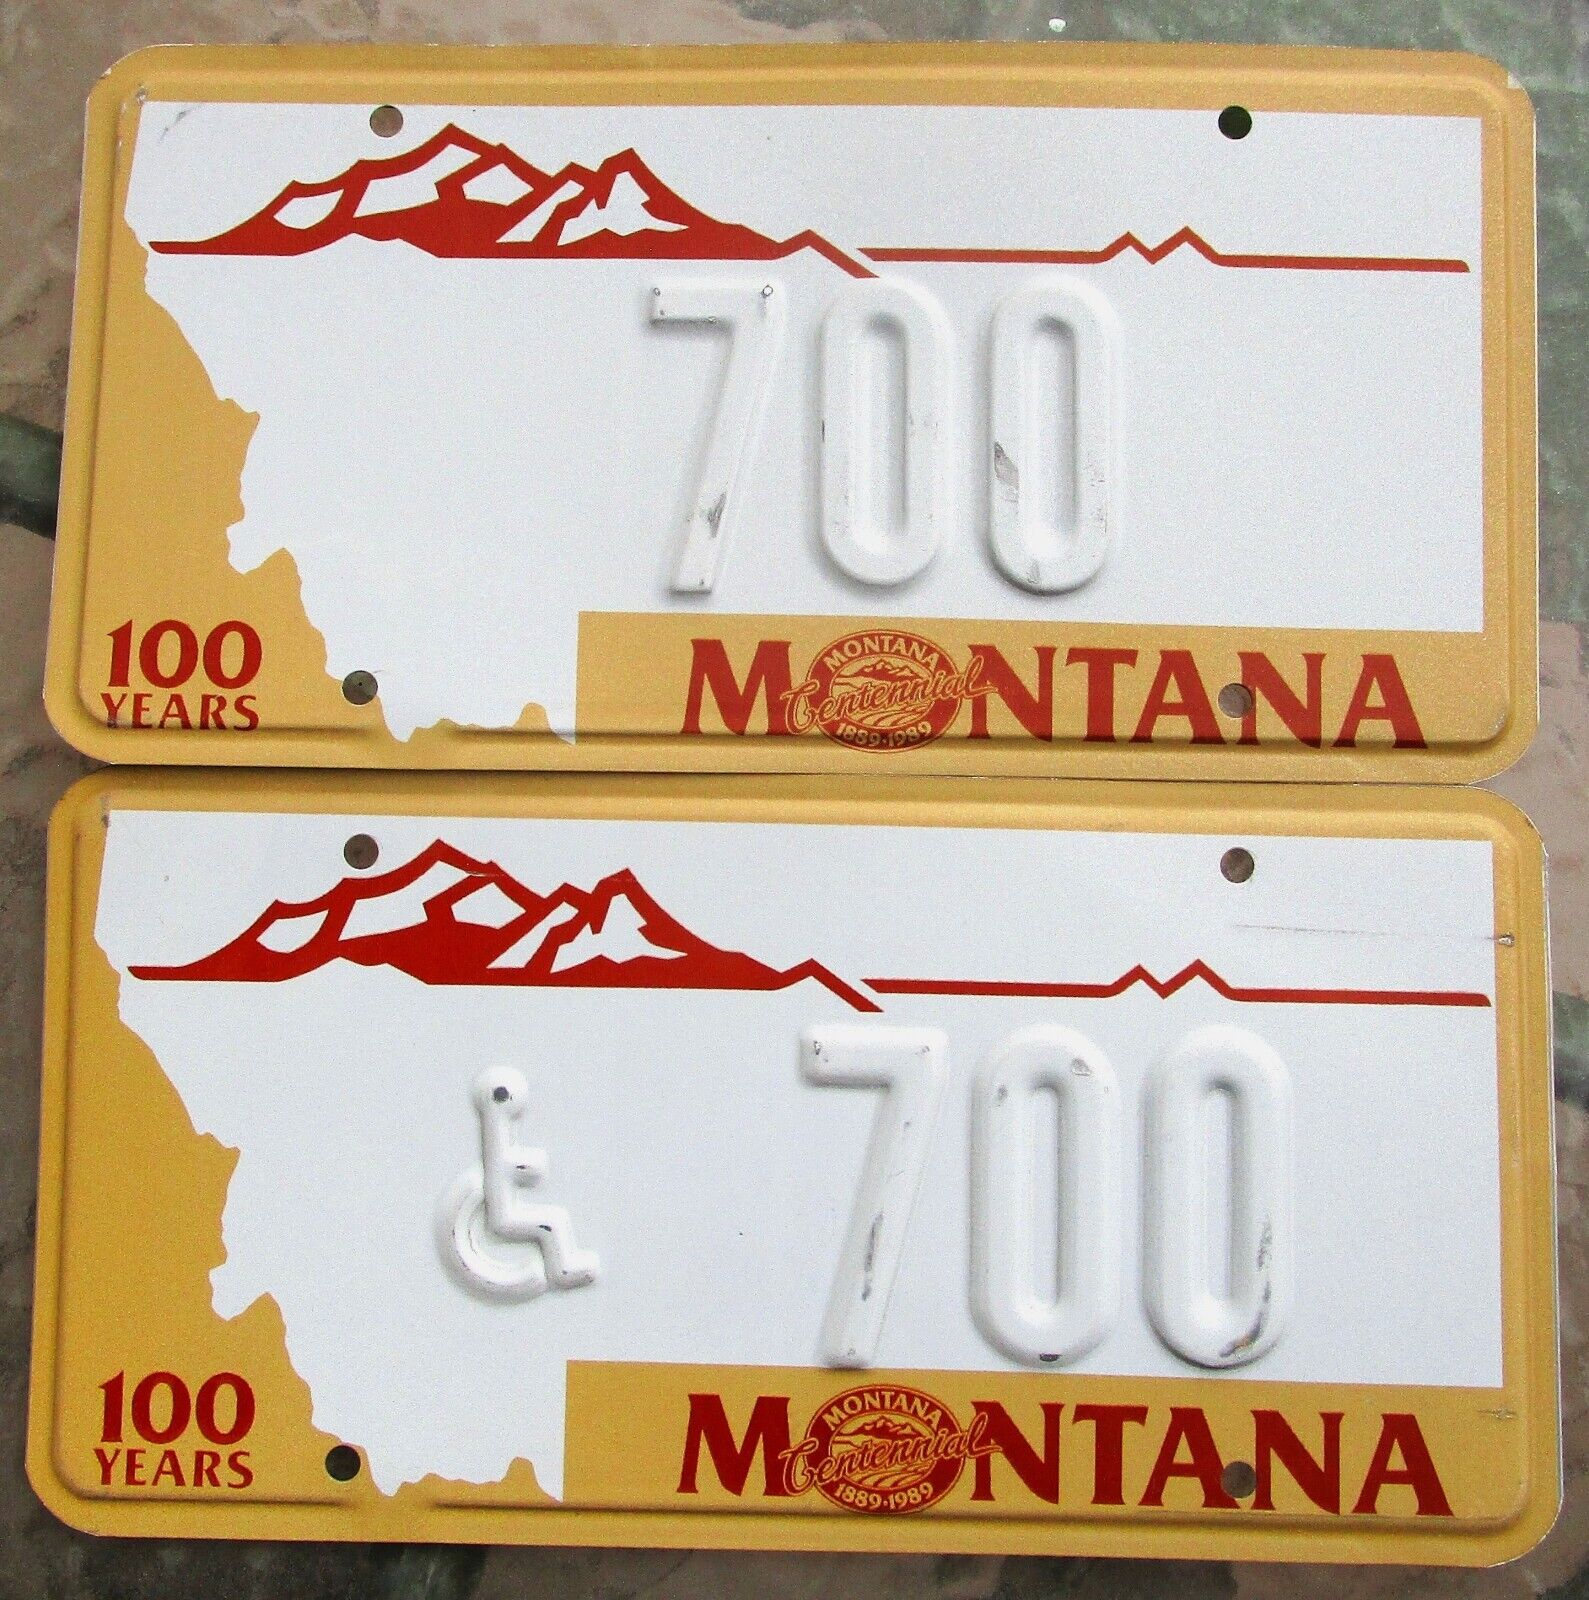 MONTANA CENTENNIAL License Plate #700 DUO - One with Wheelchair - Prison Antics?